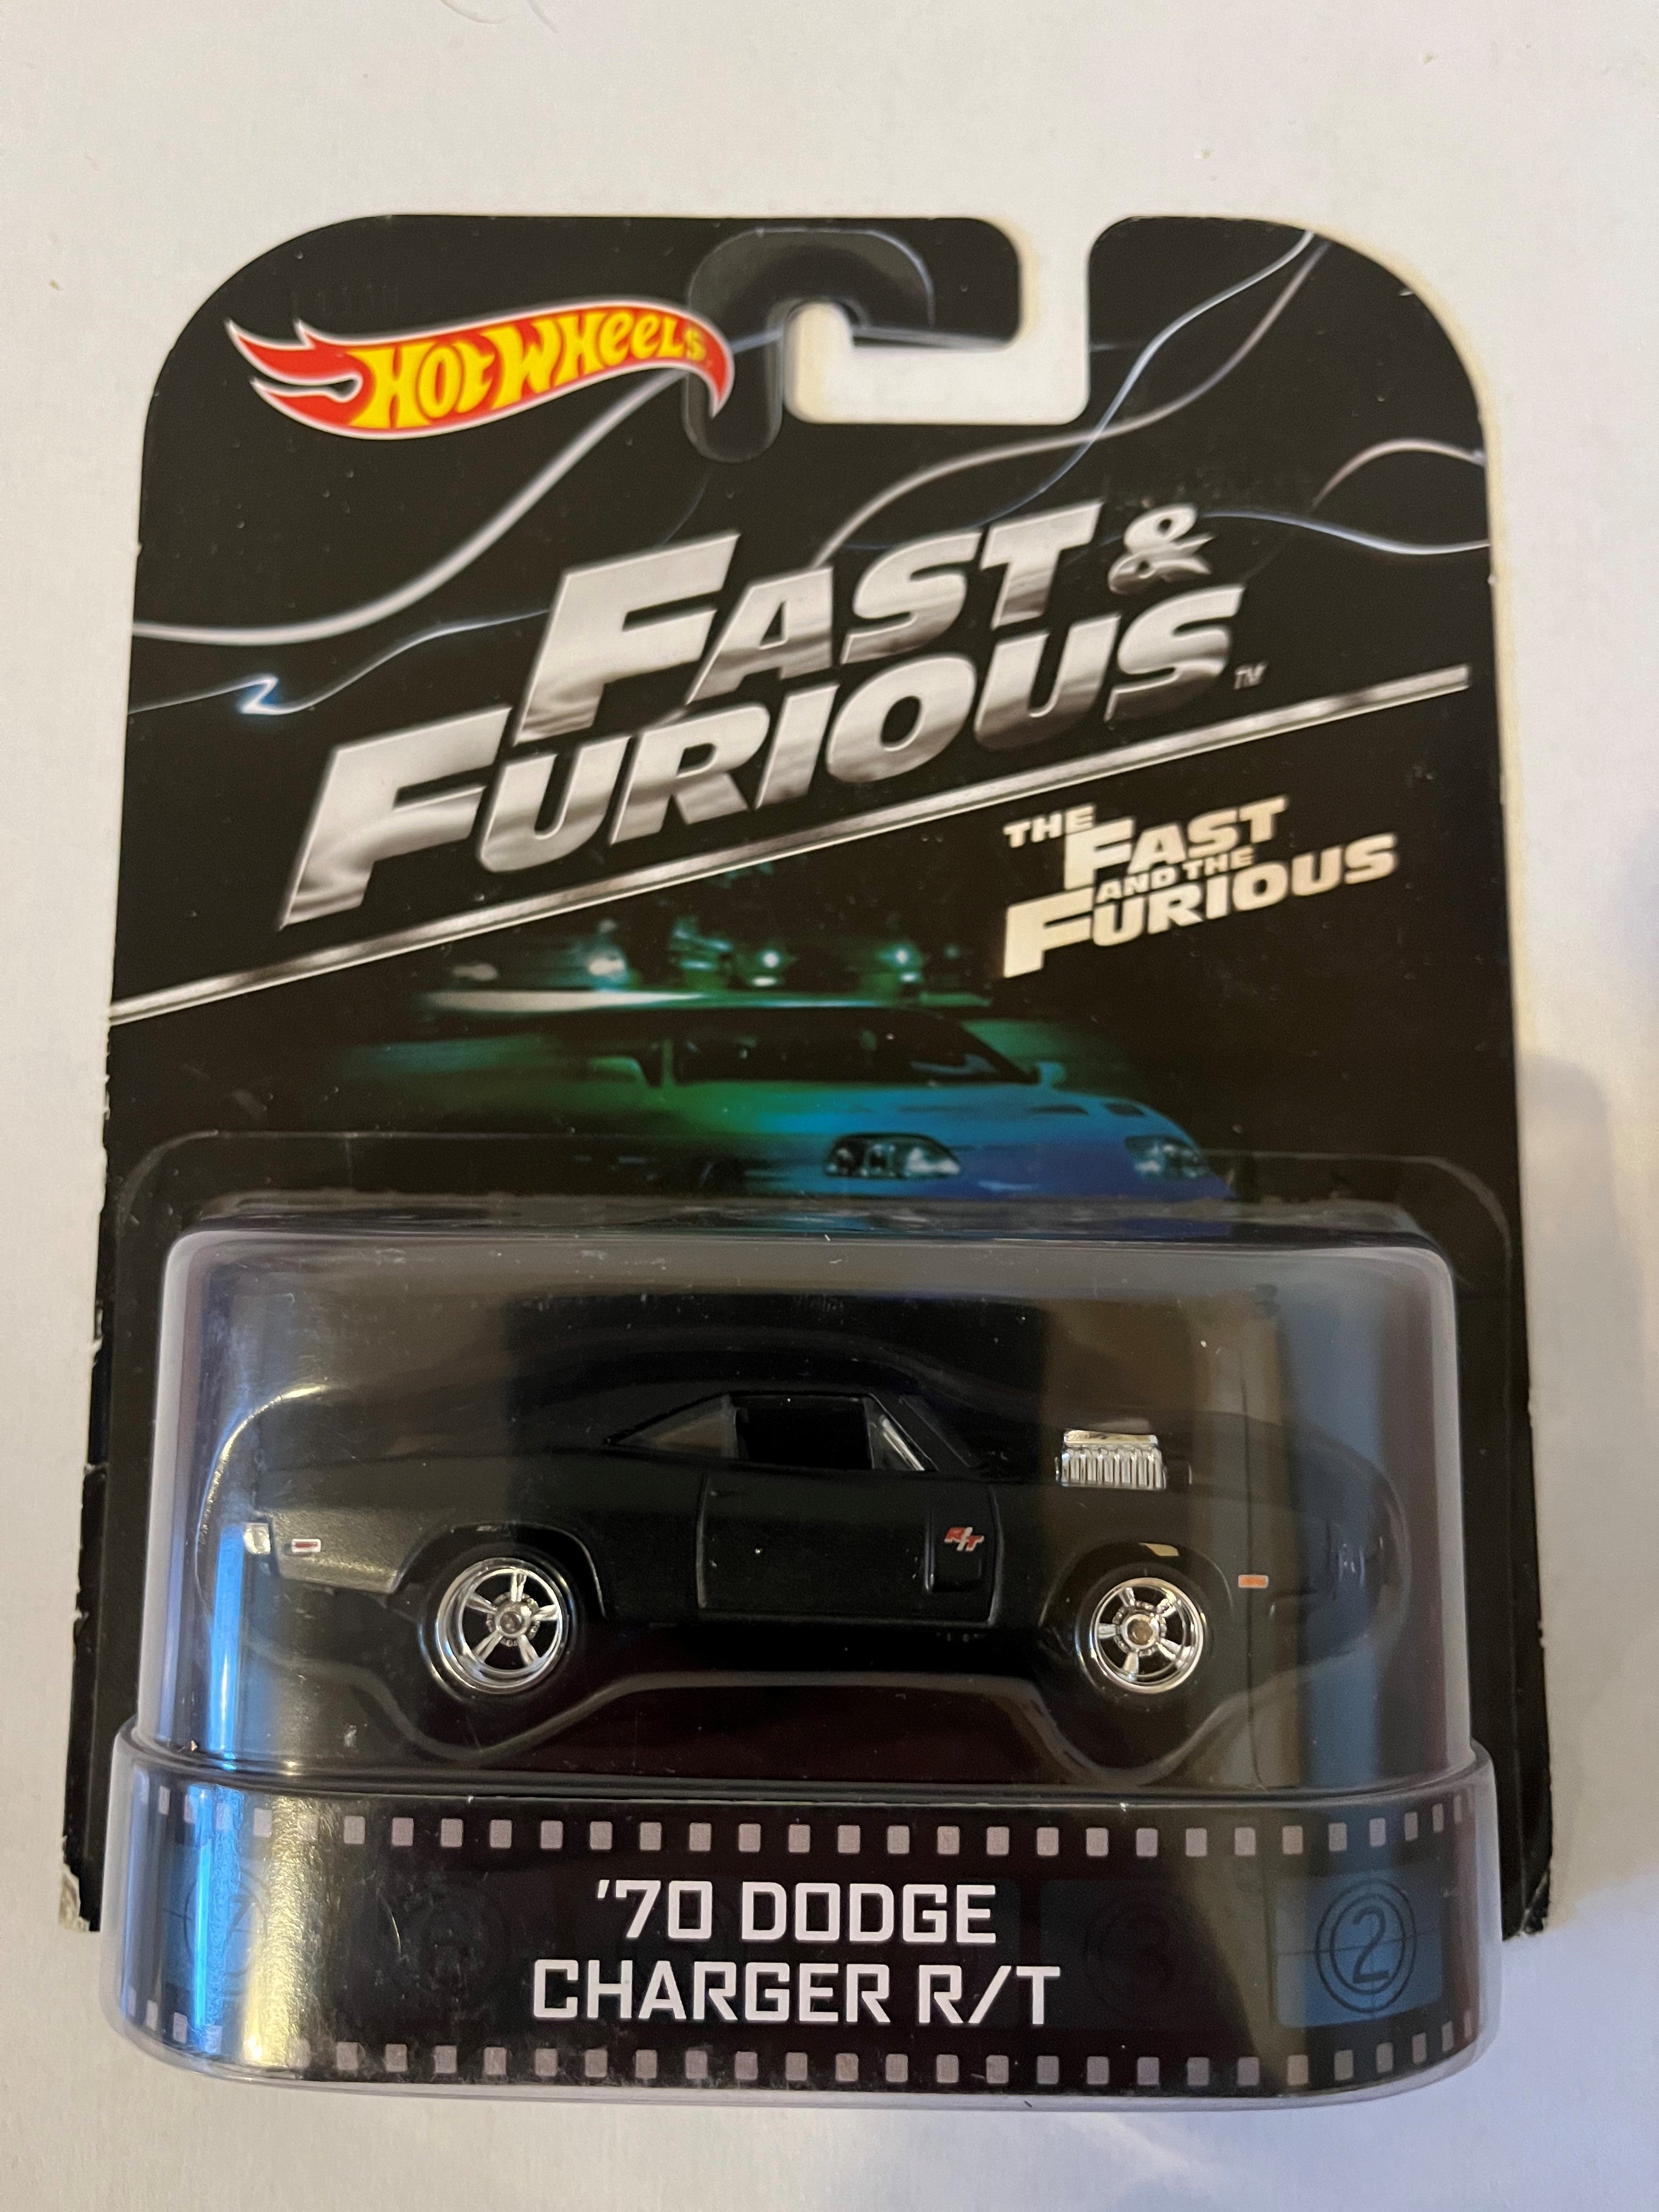 Hotwheels Fast and Furious '70 Dodge Charger R/T – Diecast Collectors